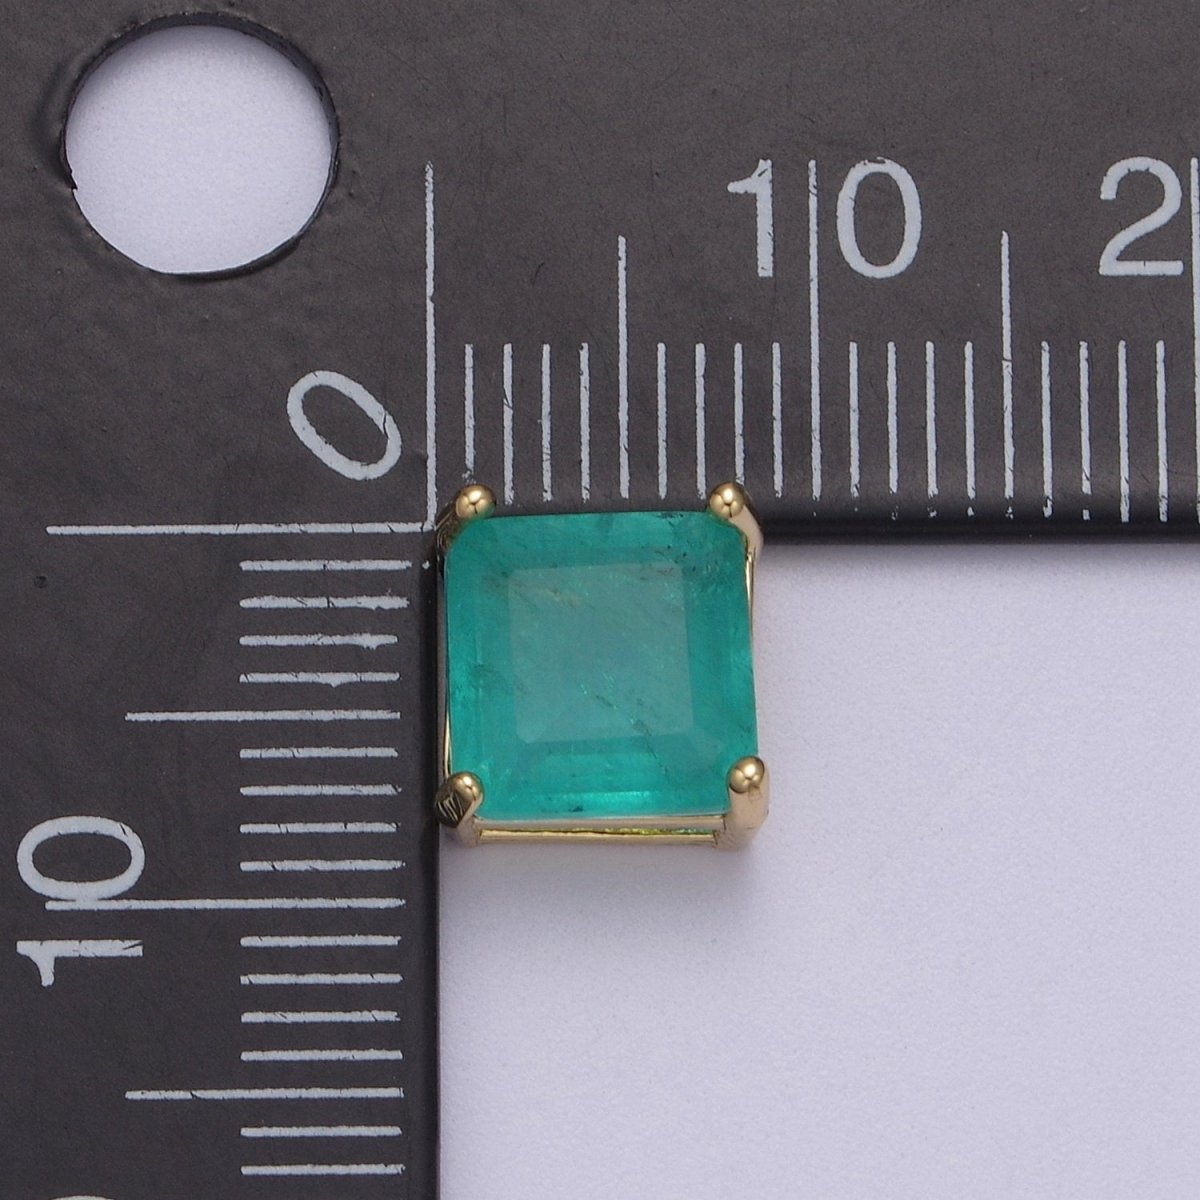 Green Aqua Cubic Zirconia Square Charm 8.7x8.5mm Small Beautiful Bright 3D Love Jewelry Gold Beads spacer for Bracelet Necklace Supply B-462 - DLUXCA